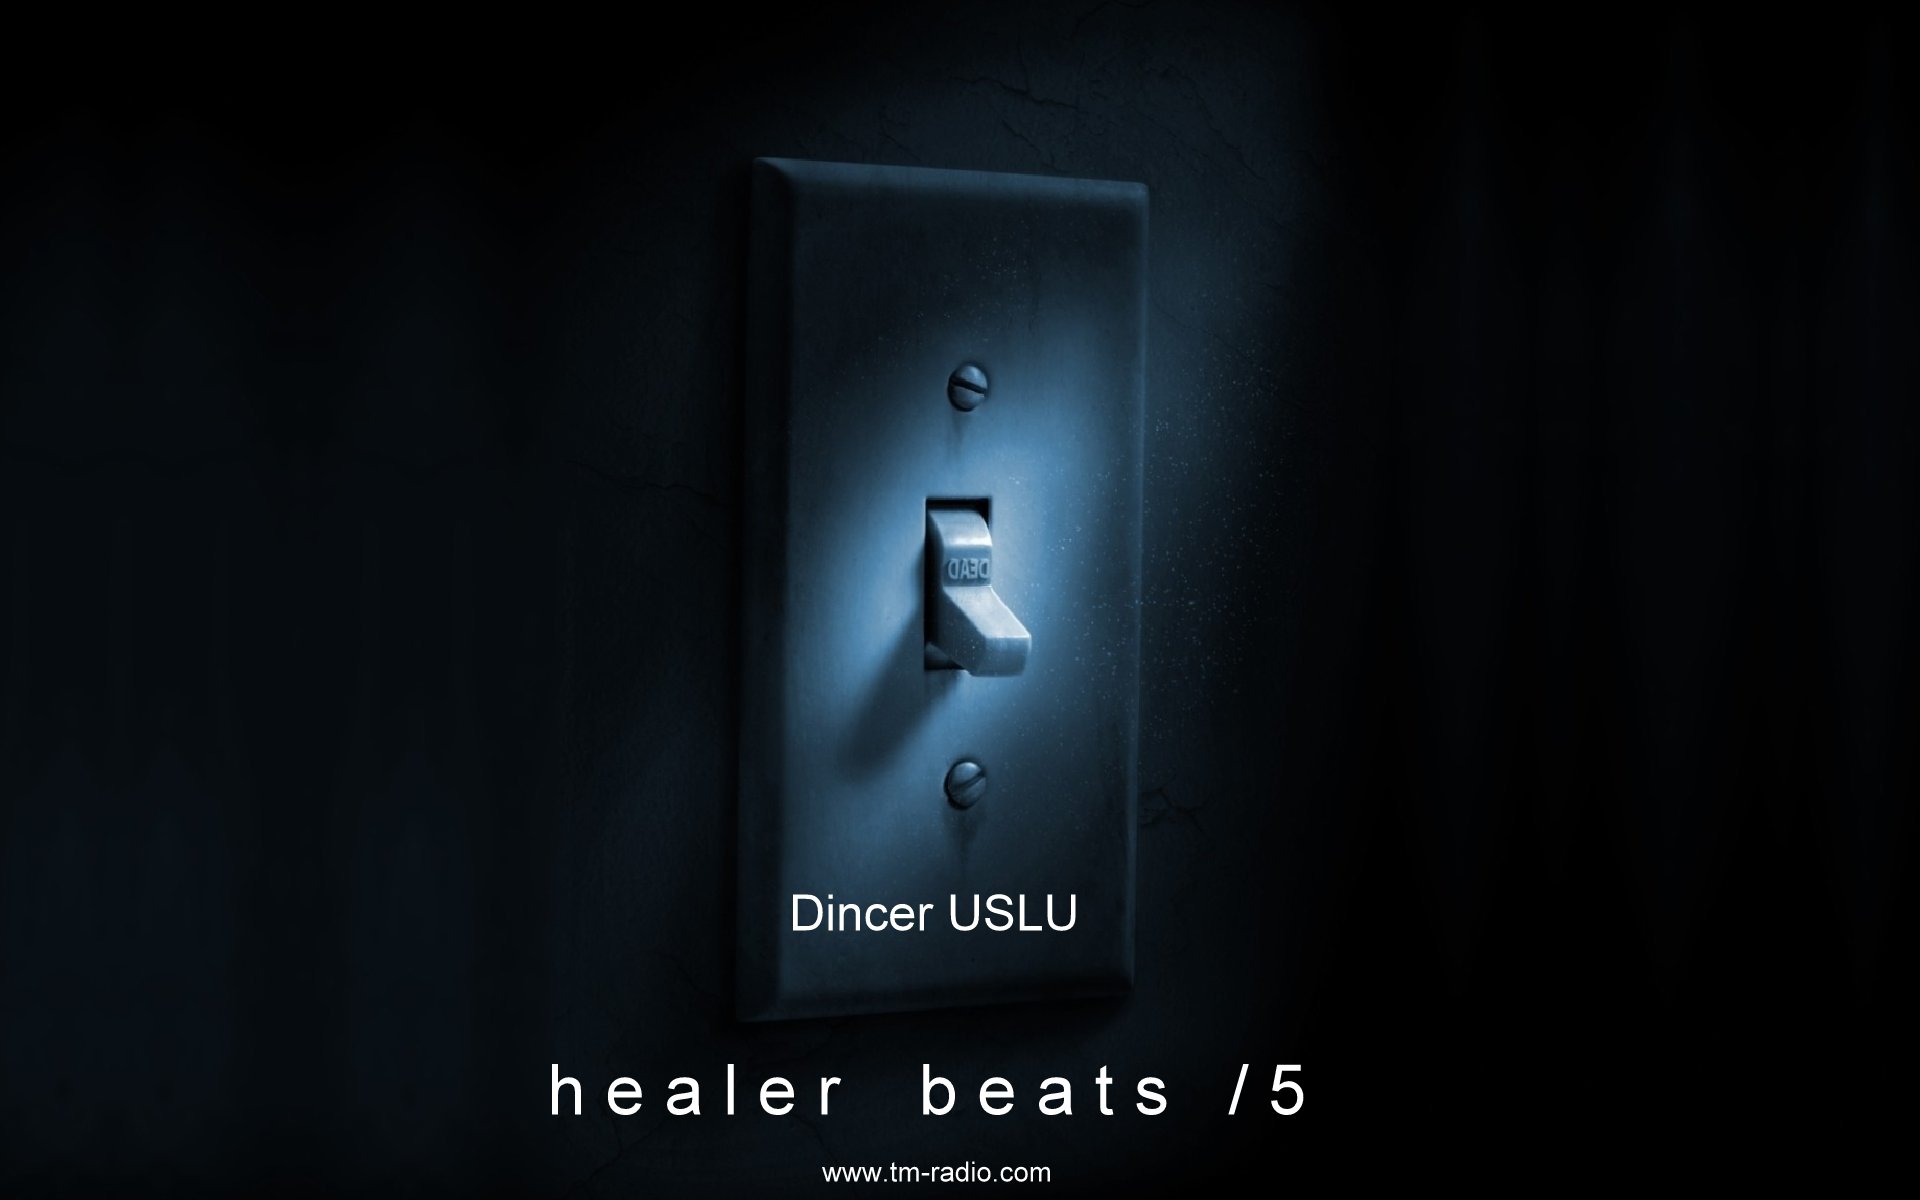 HEALER BEATS :: Episode aired on August 8, 2020, 8pm banner logo